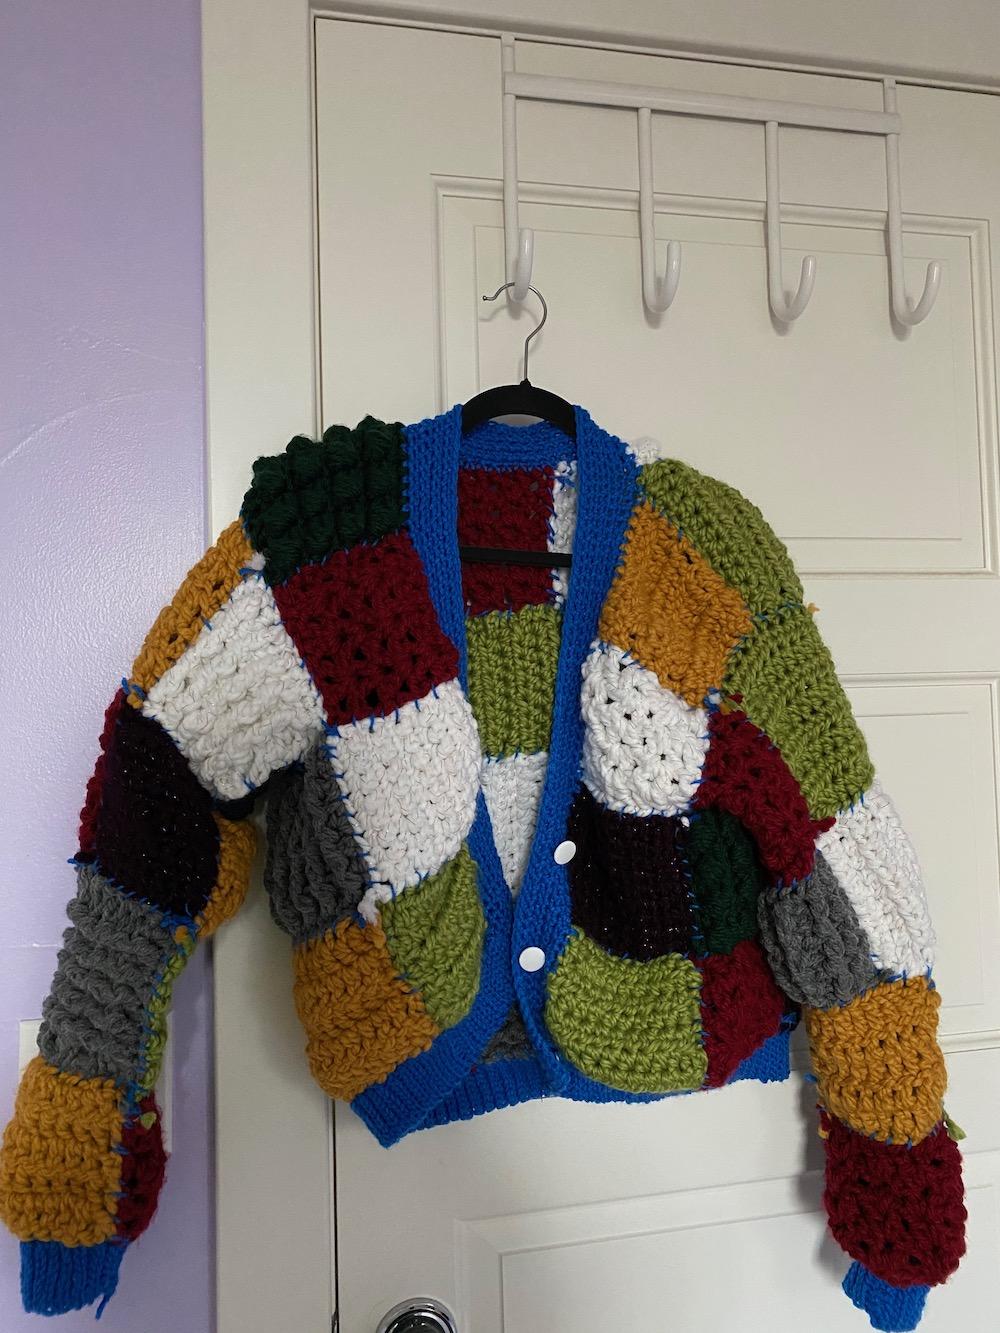 Senior Aracelli Chang's crocheted replica of the Harry Styles cardigan hangs in her room after its completion at the end of August. After postponing her graduation by a semester, Chang said she hopes to continue her hobbies during her time off from school. Photo courtesy of Aracelli Chang